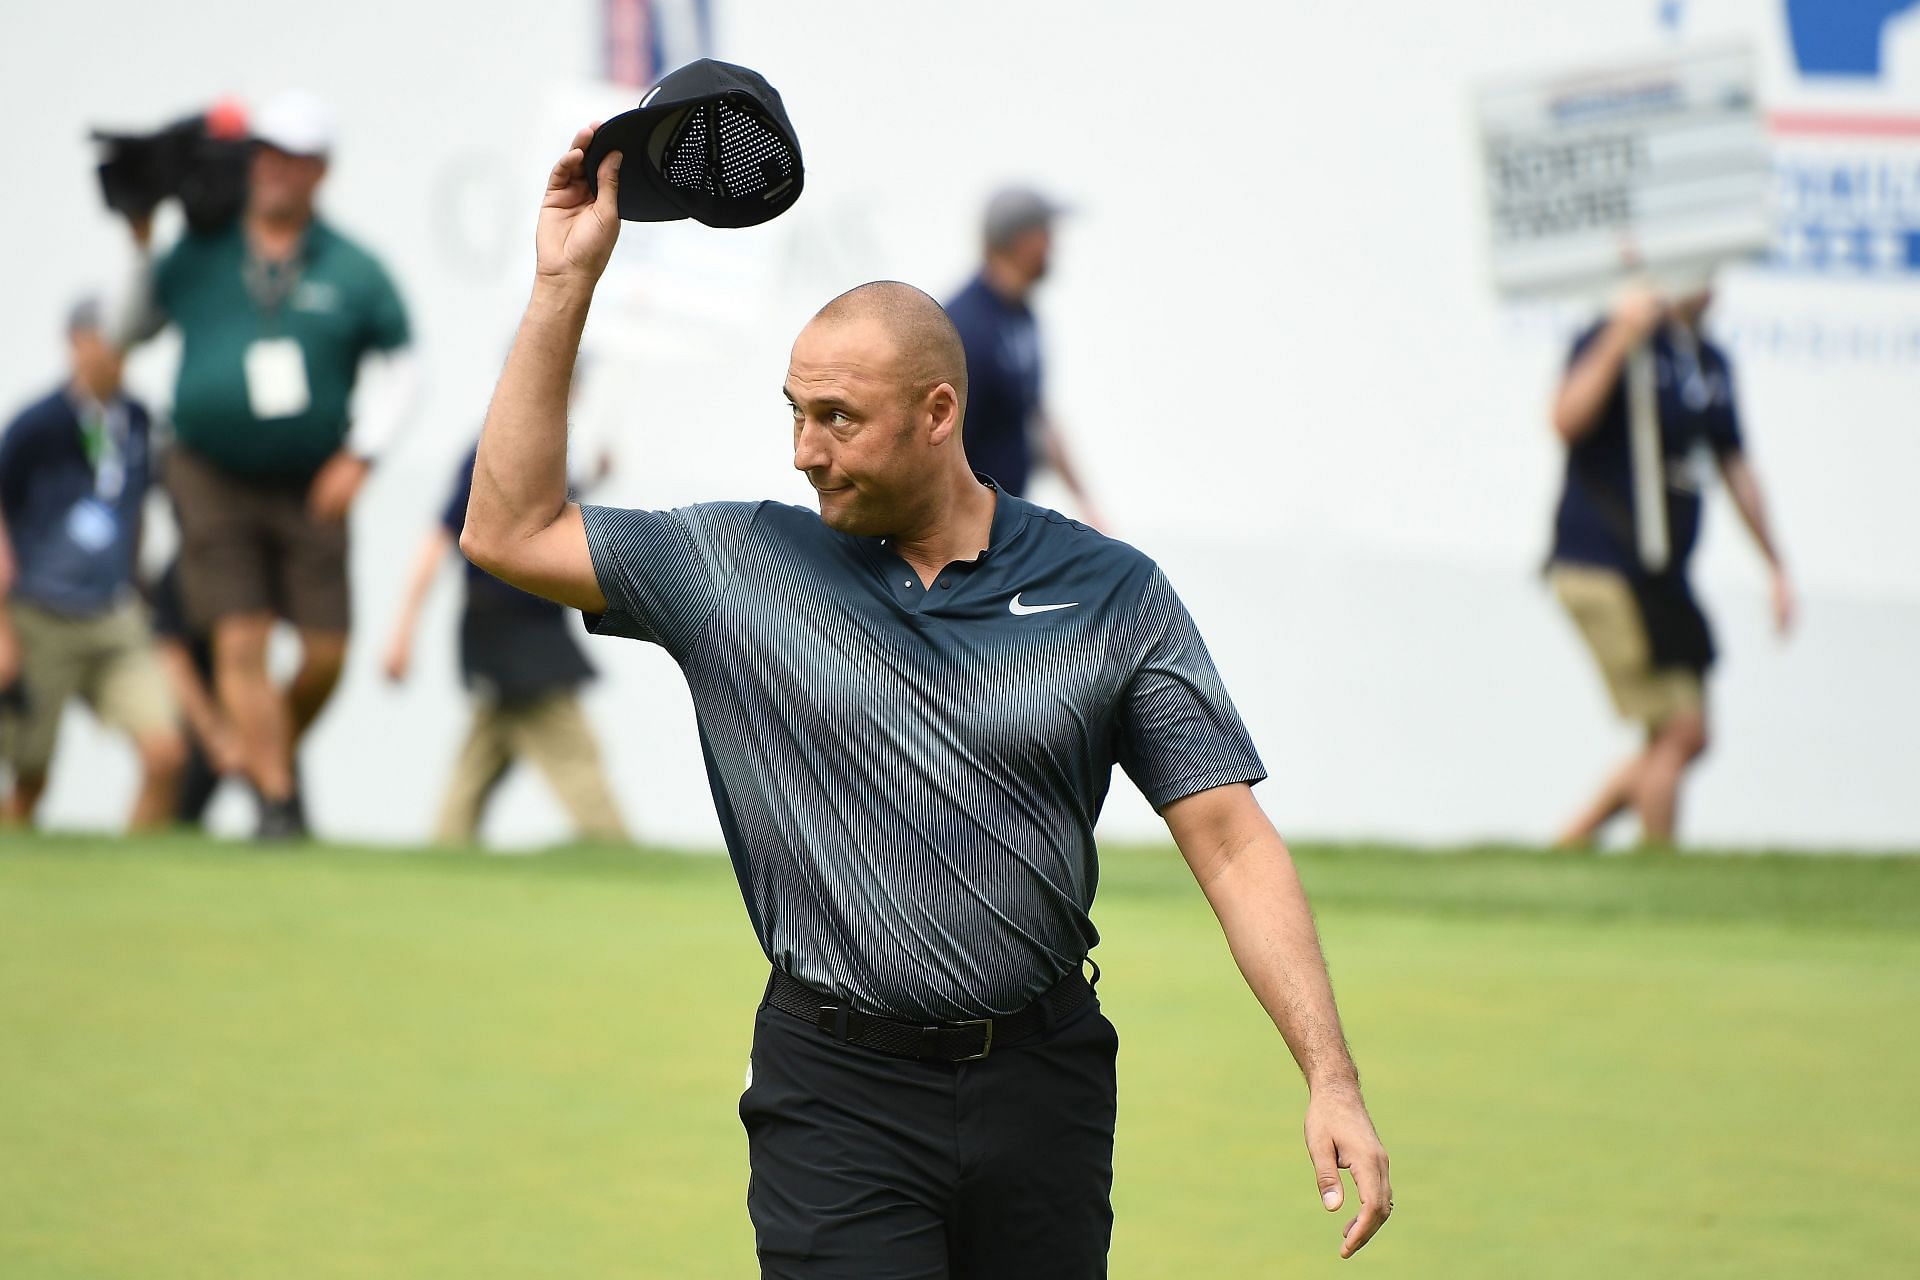 Jeter tips his hat to the crowd at American Family Insurance Championship.